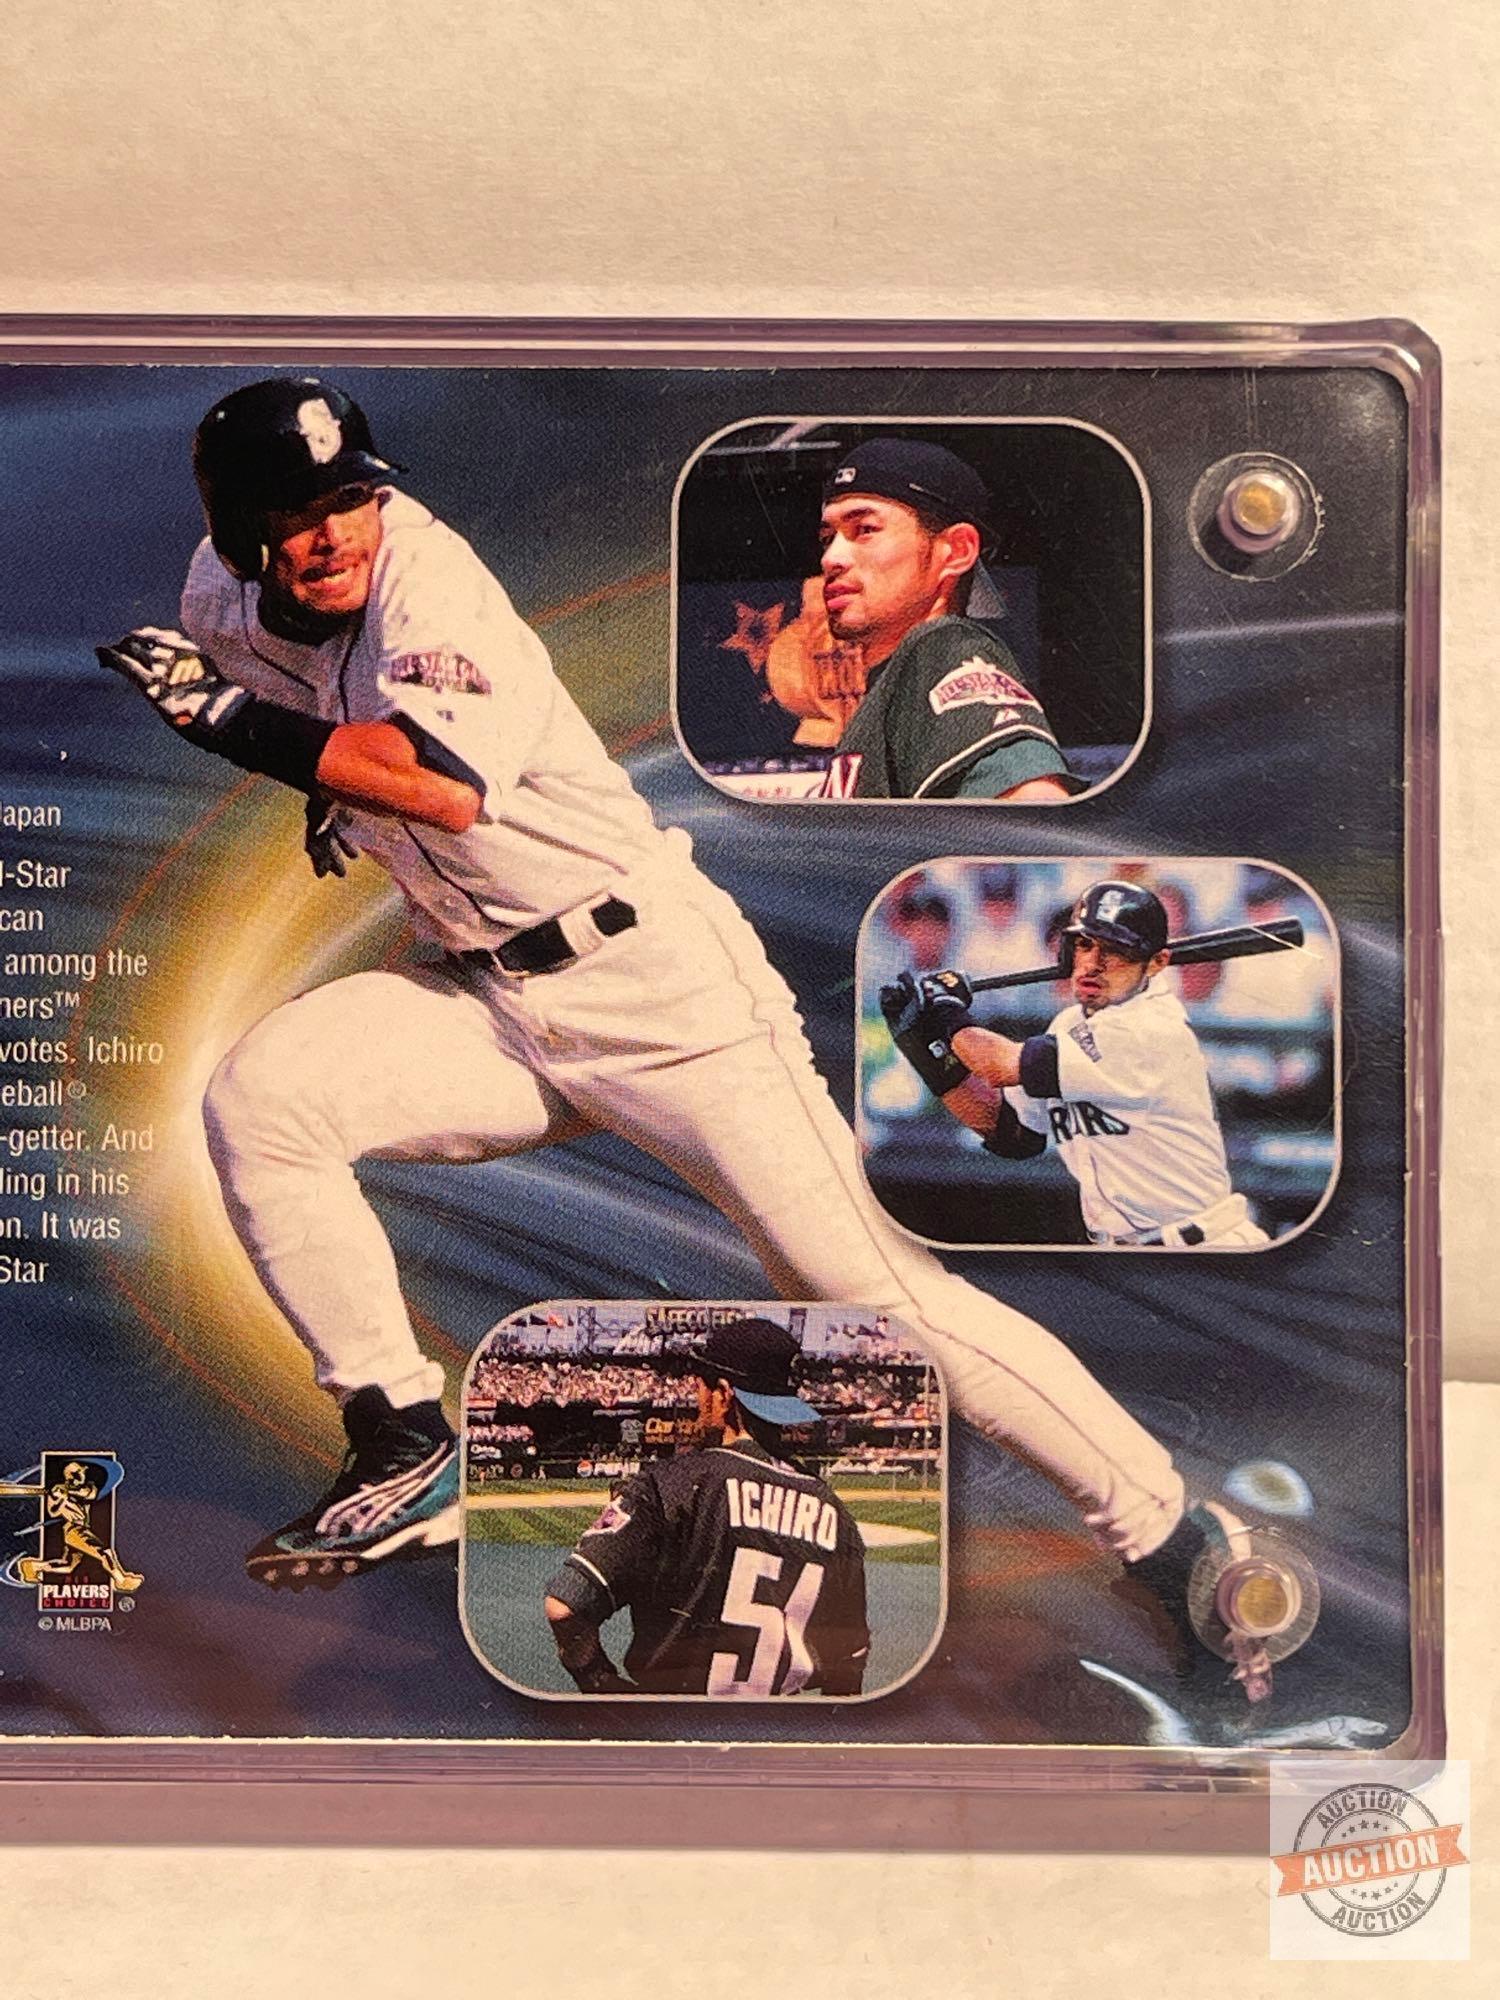 2001 All-Star Ichiro Limited-Edition gold foil signature card